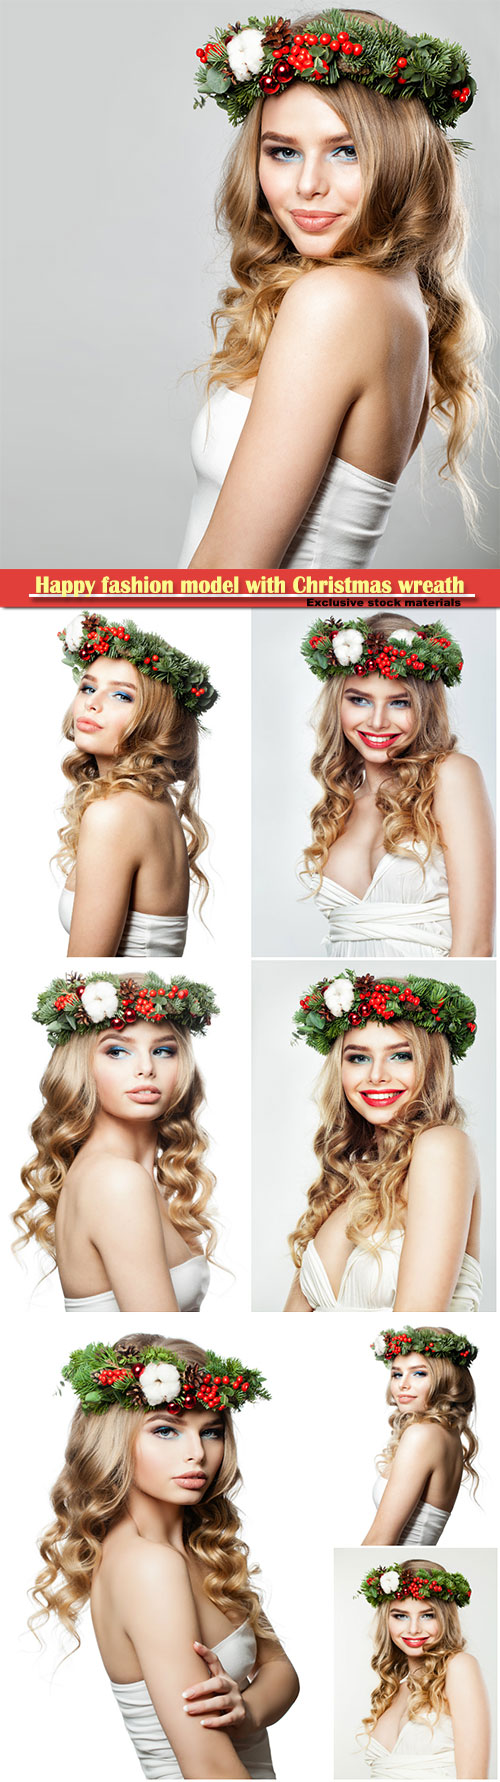 Happy fashion model with Christmas or New Year wreath